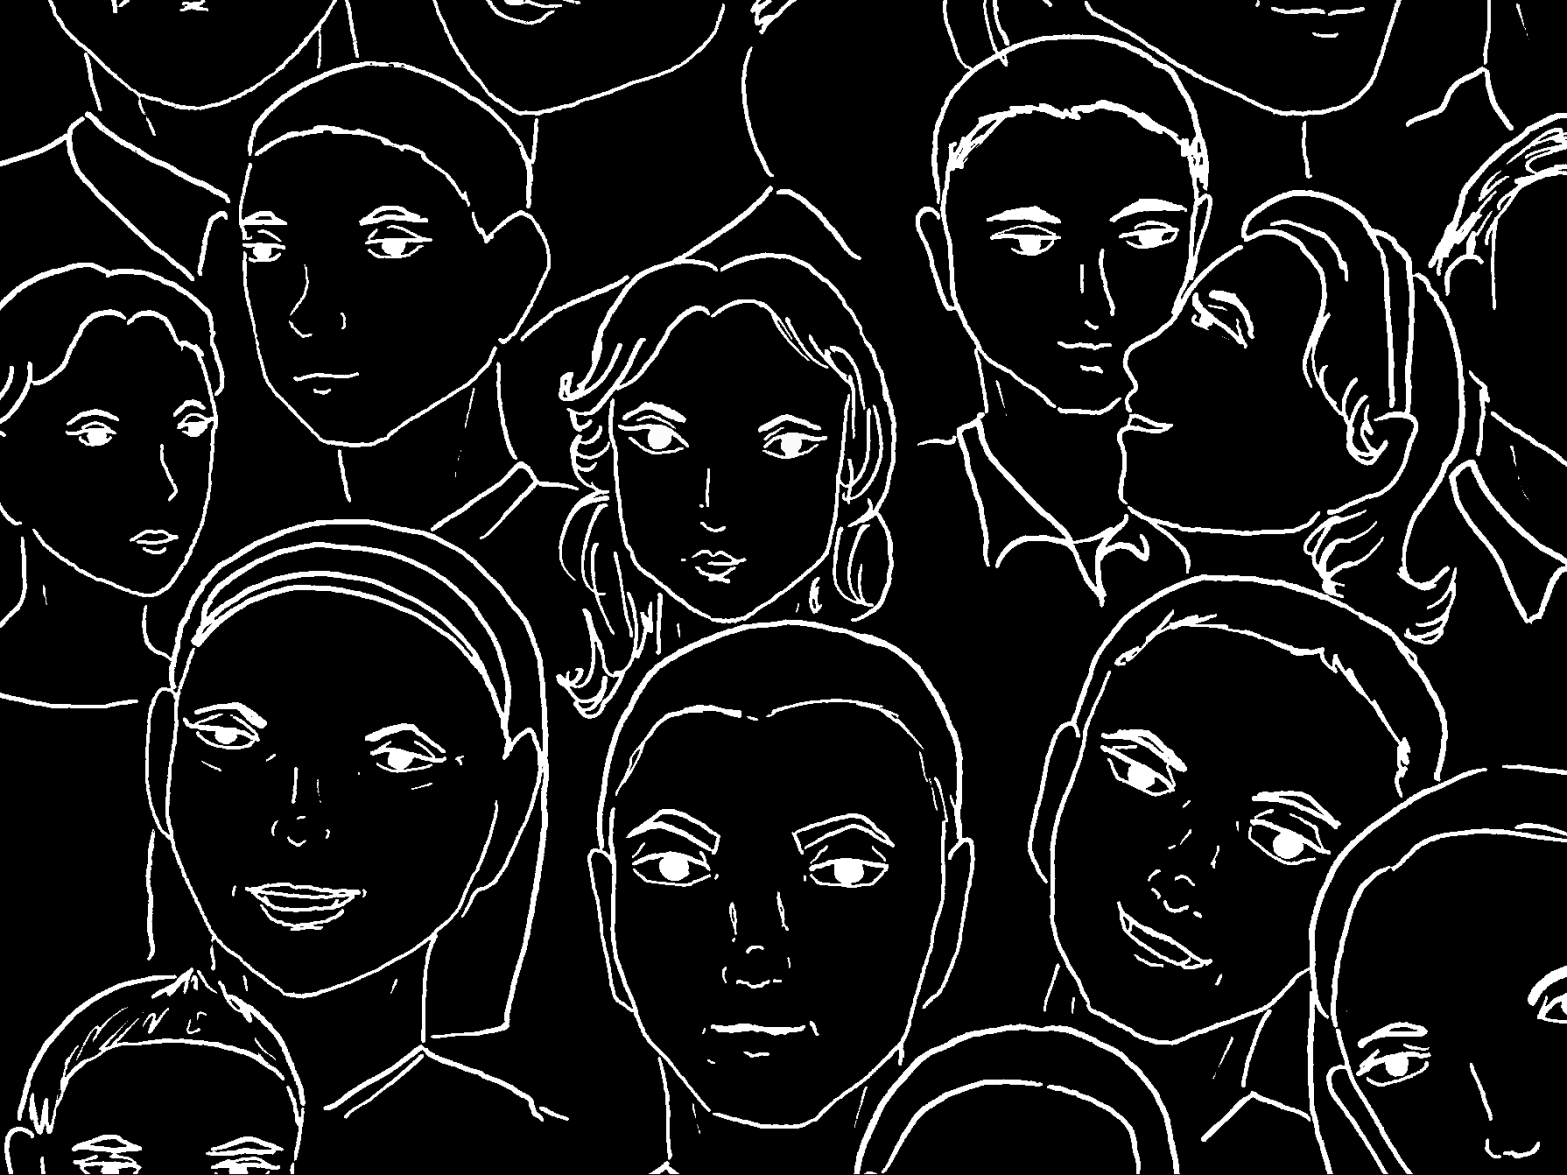 Drawing of overlapping faces